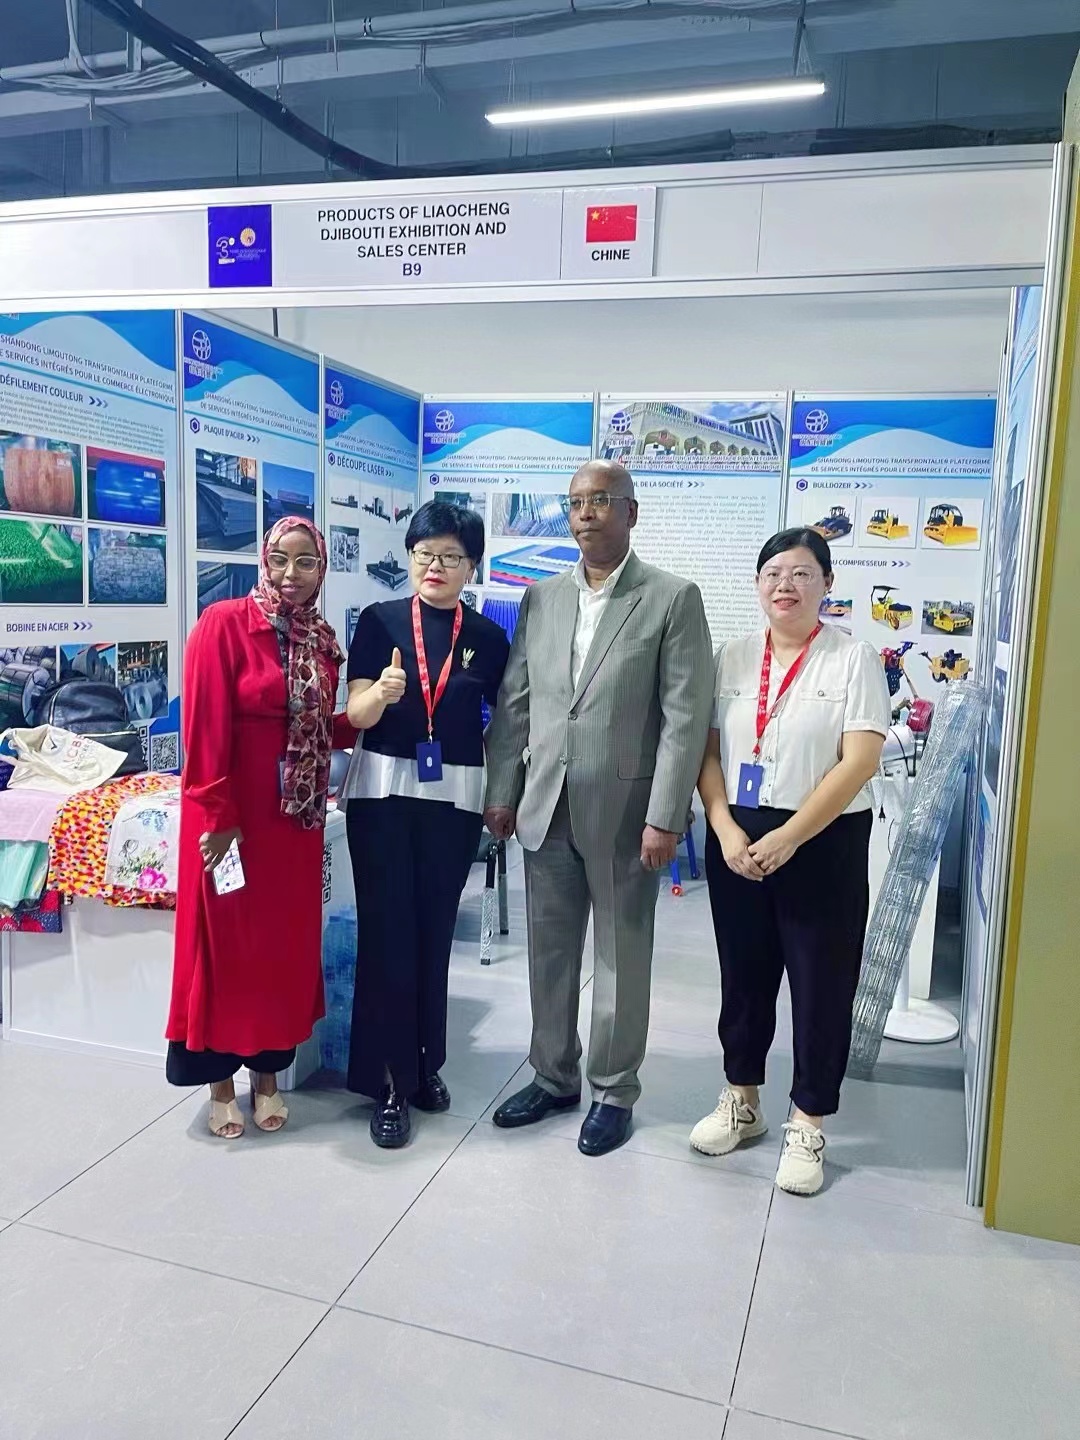 Shandong Limao Tong was invited to participate in the 2023 Djibouti International Expo